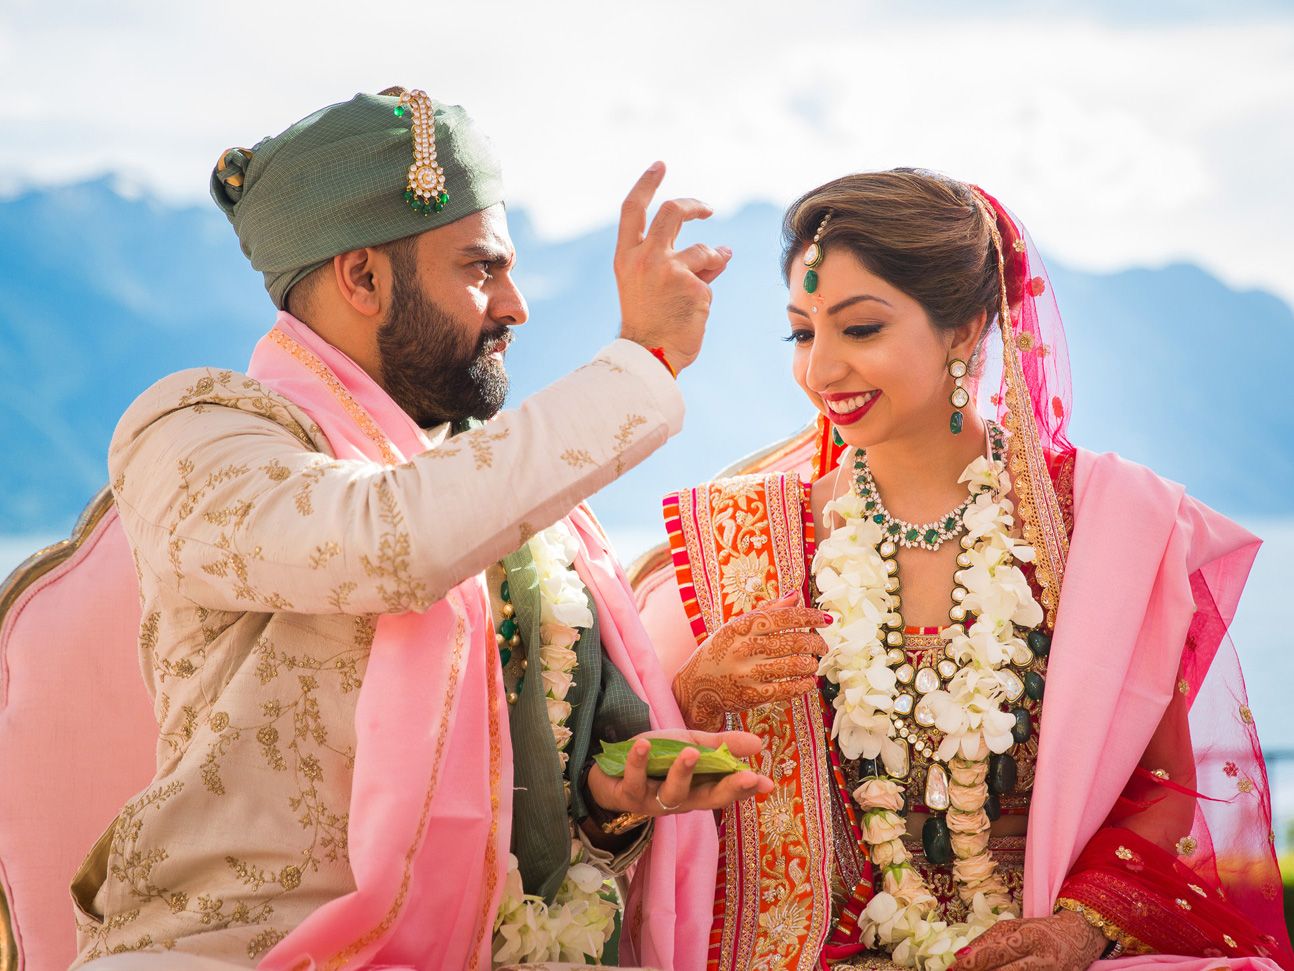 This Indian wedding in Switzerland was the stuff of dreams. Condé Nast Traveller India